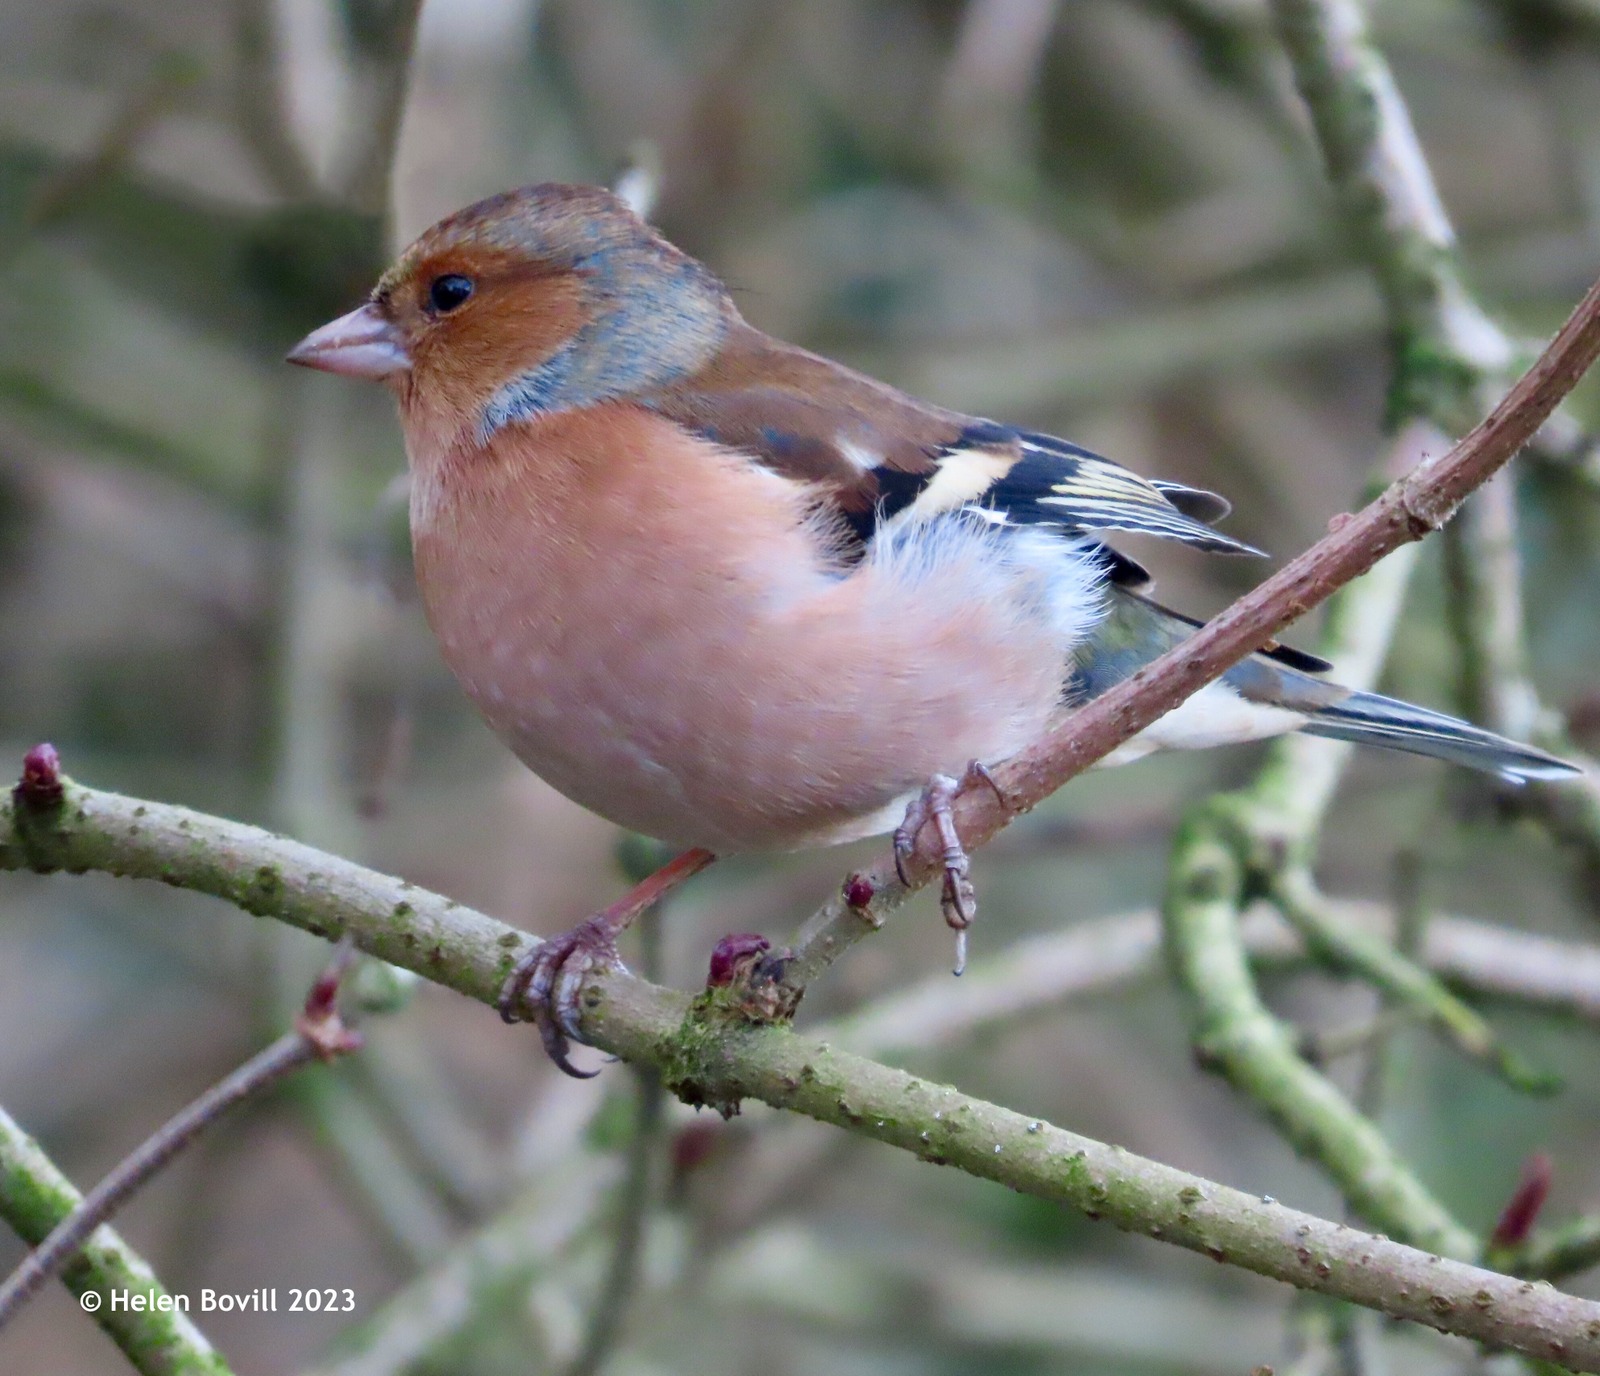 A male chaffinch on a branch in the cemetery